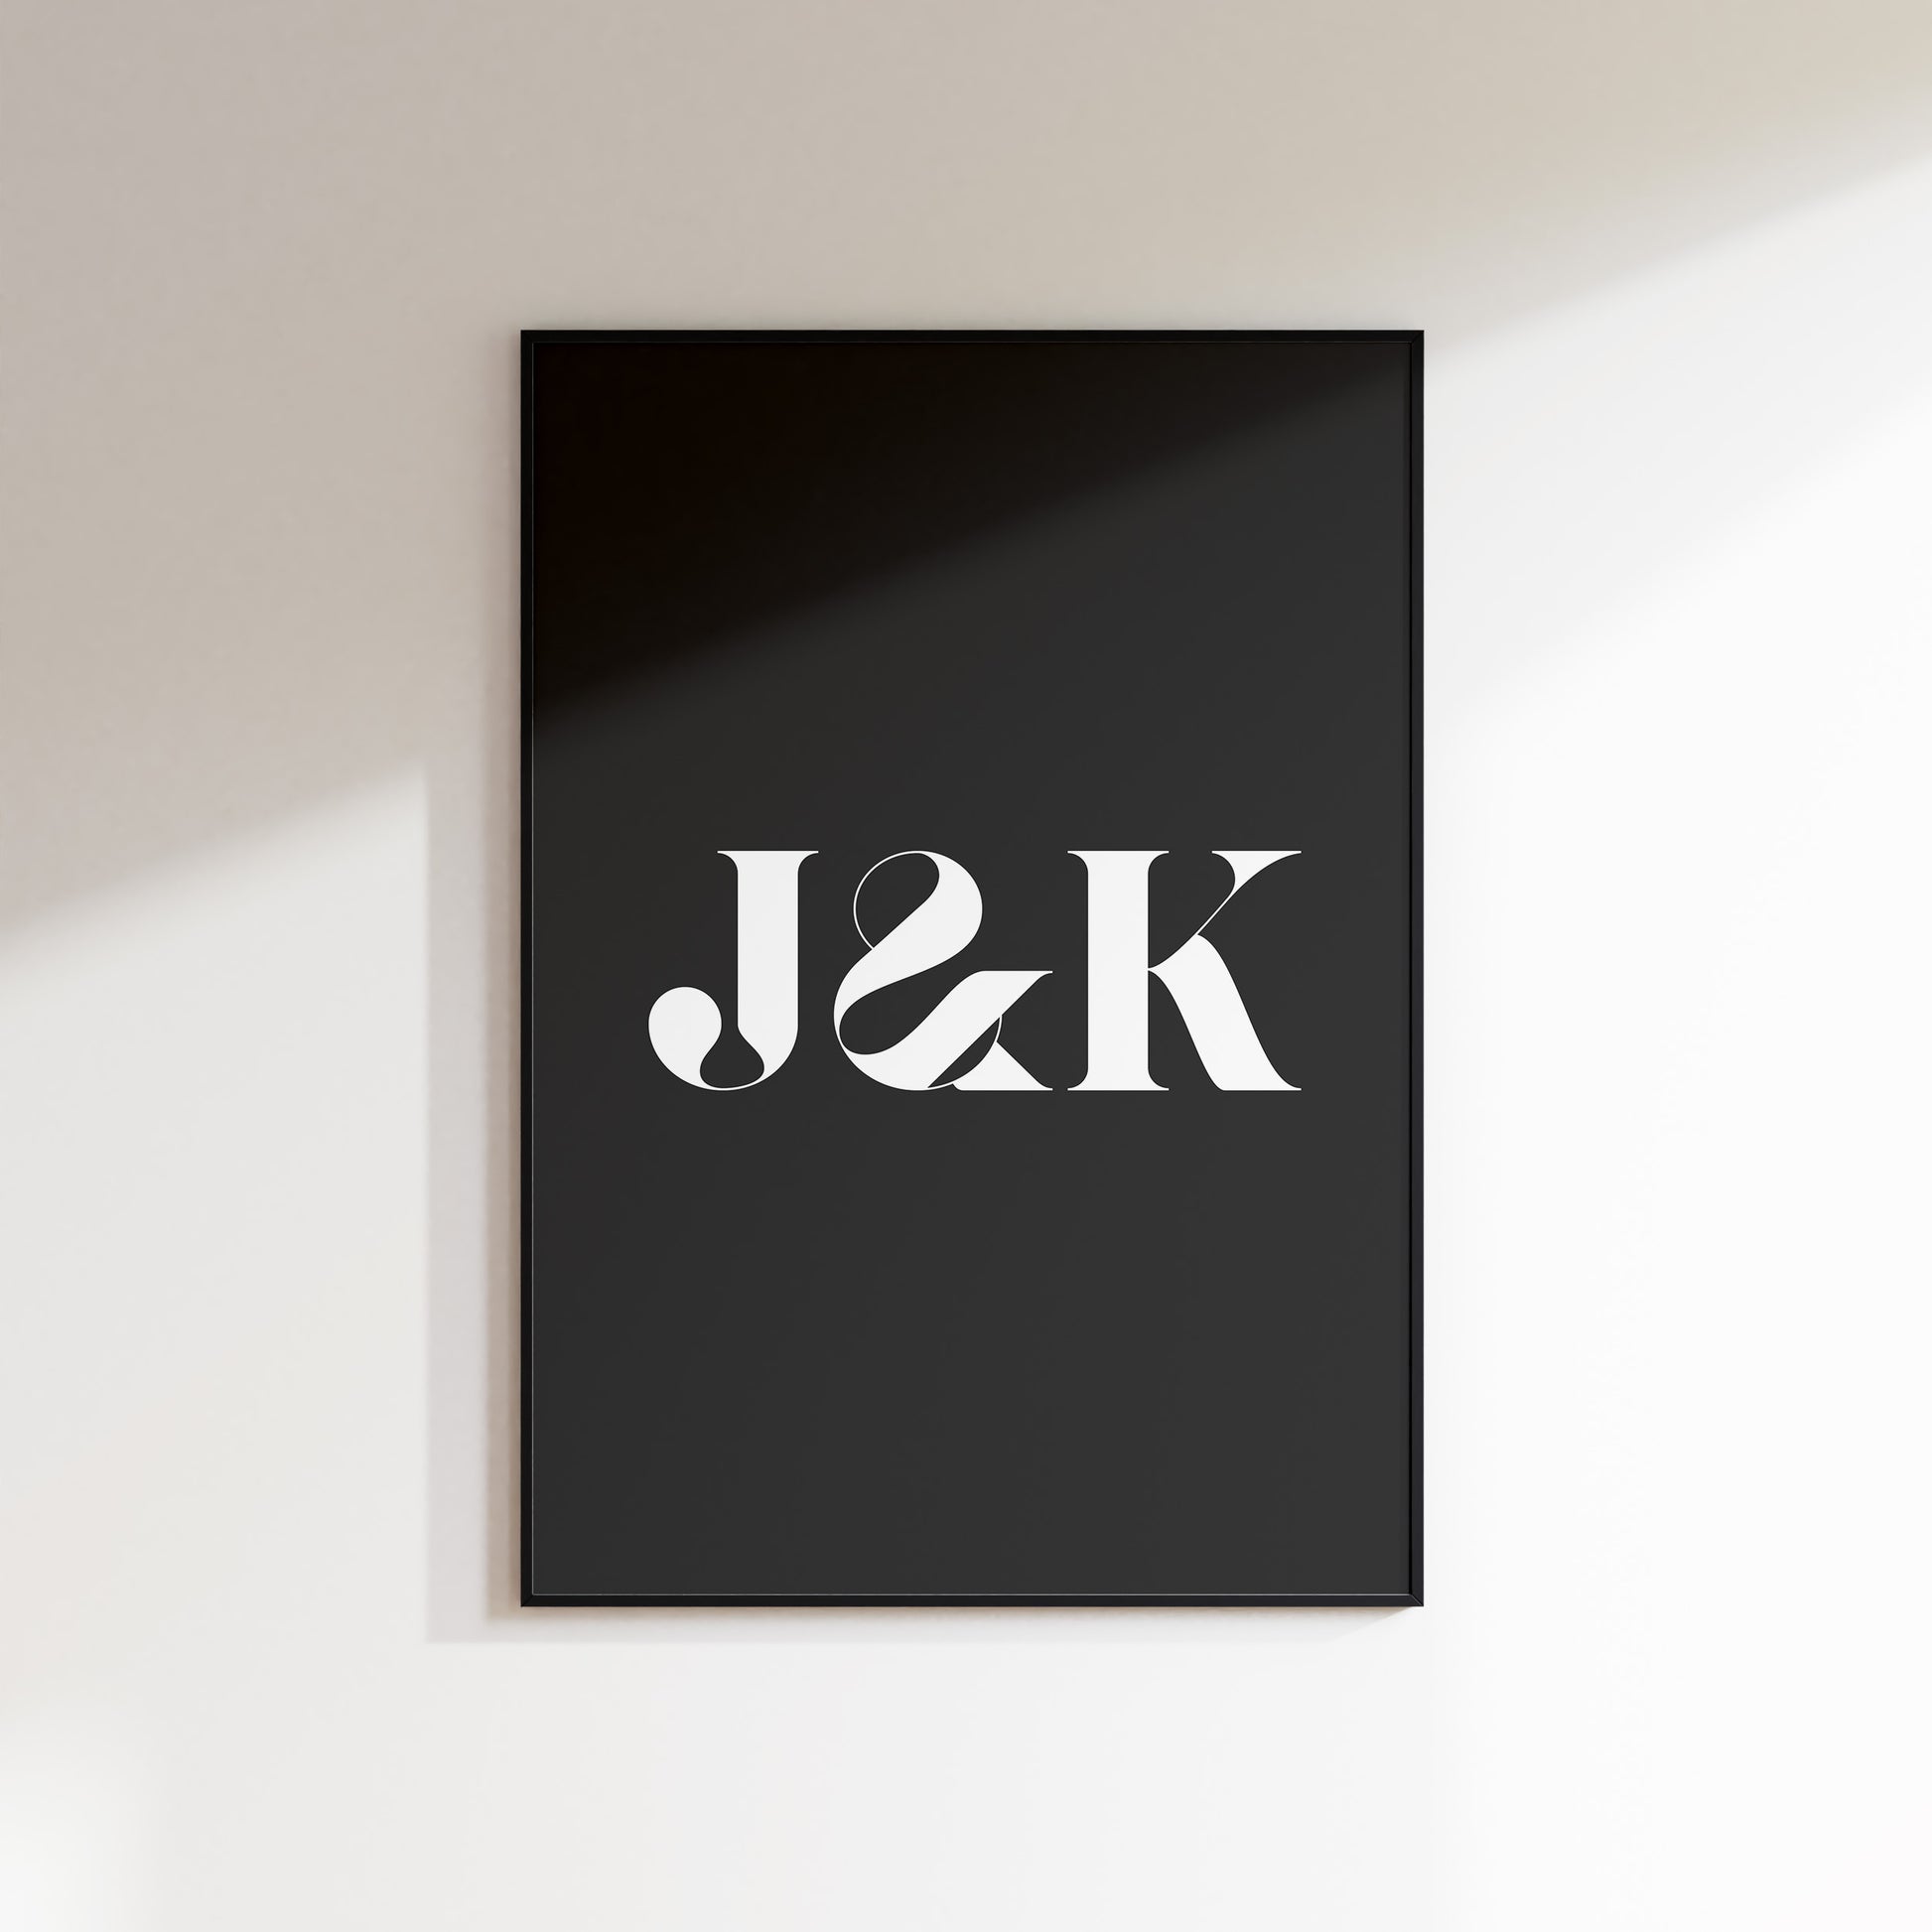 An initials print for the home, ideal for hallways, living rooms and bedrooms. This is a slate coloured print with a white uppercase ‘J & K’ in a high contrast serif typeface. Print is in a black frame on a white wall background.